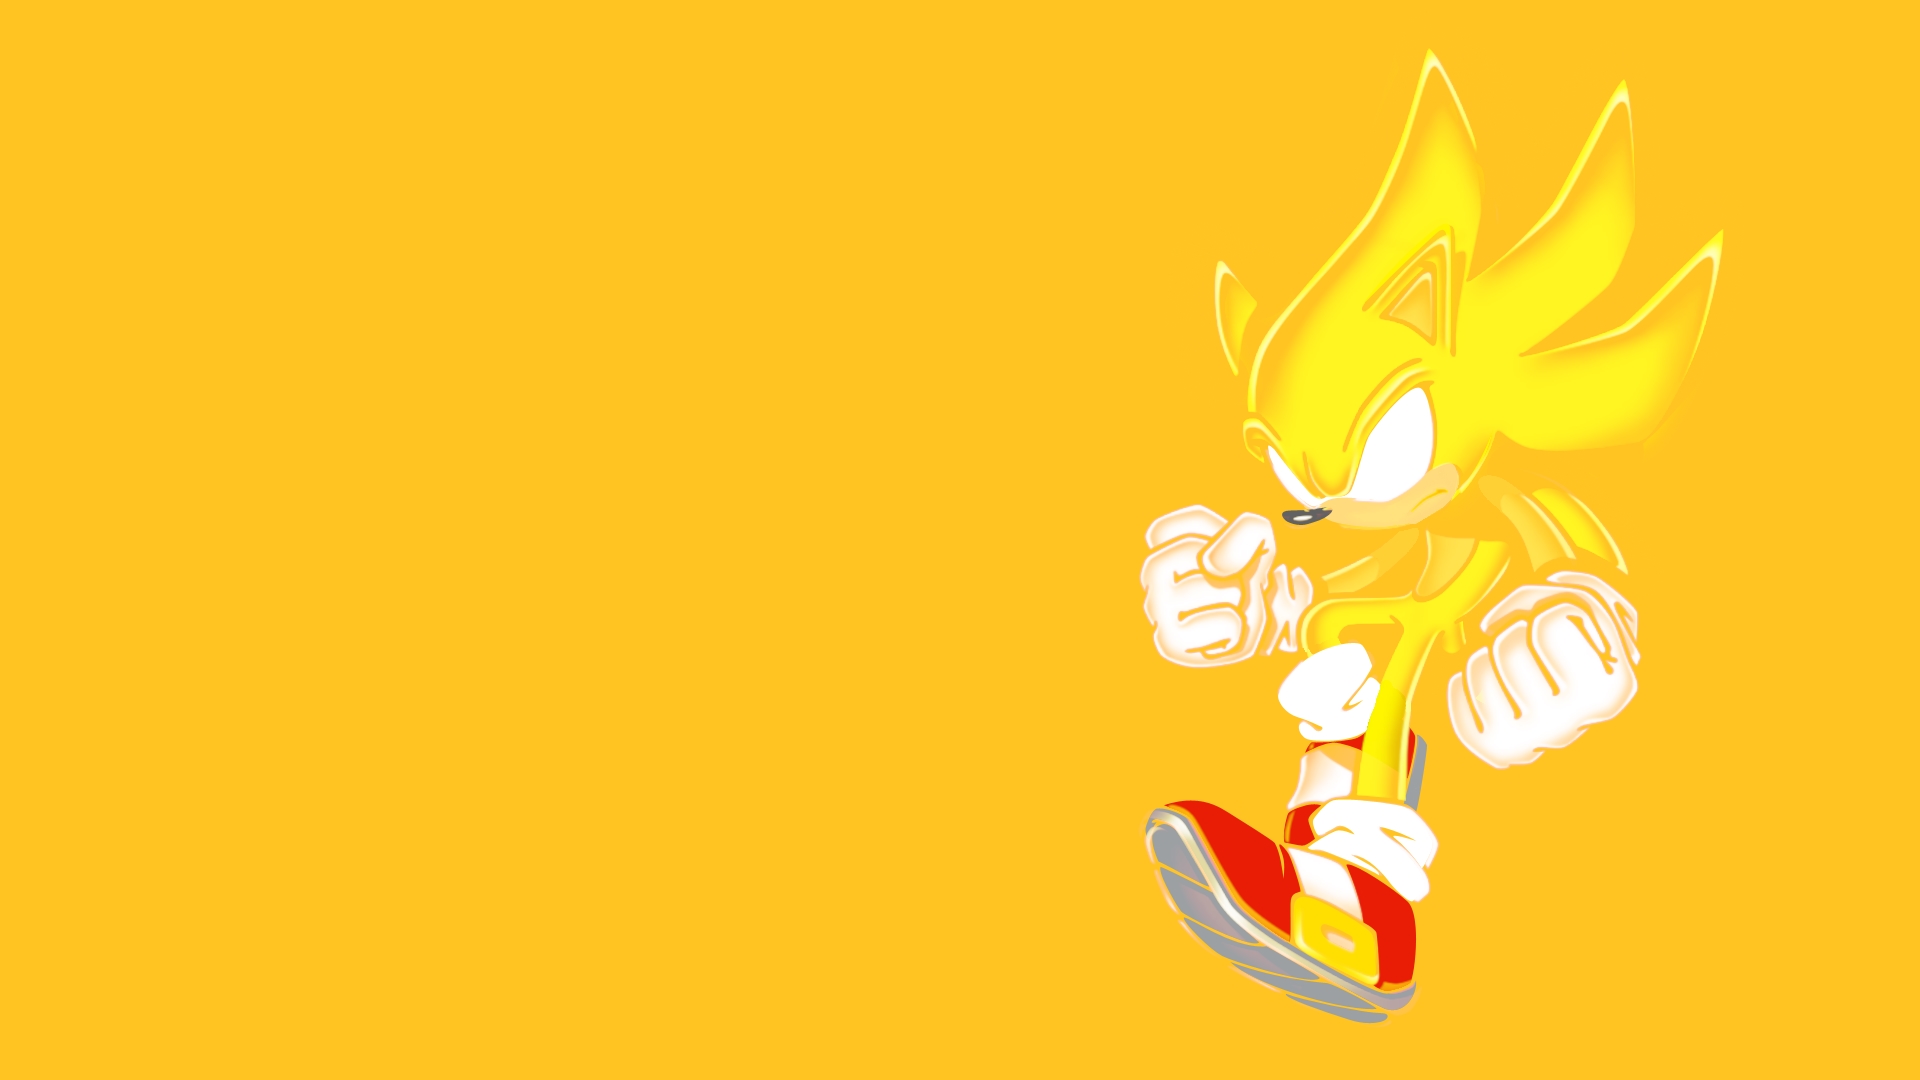 Sonic Sonic the Hedgehog Yellow wallpaper background